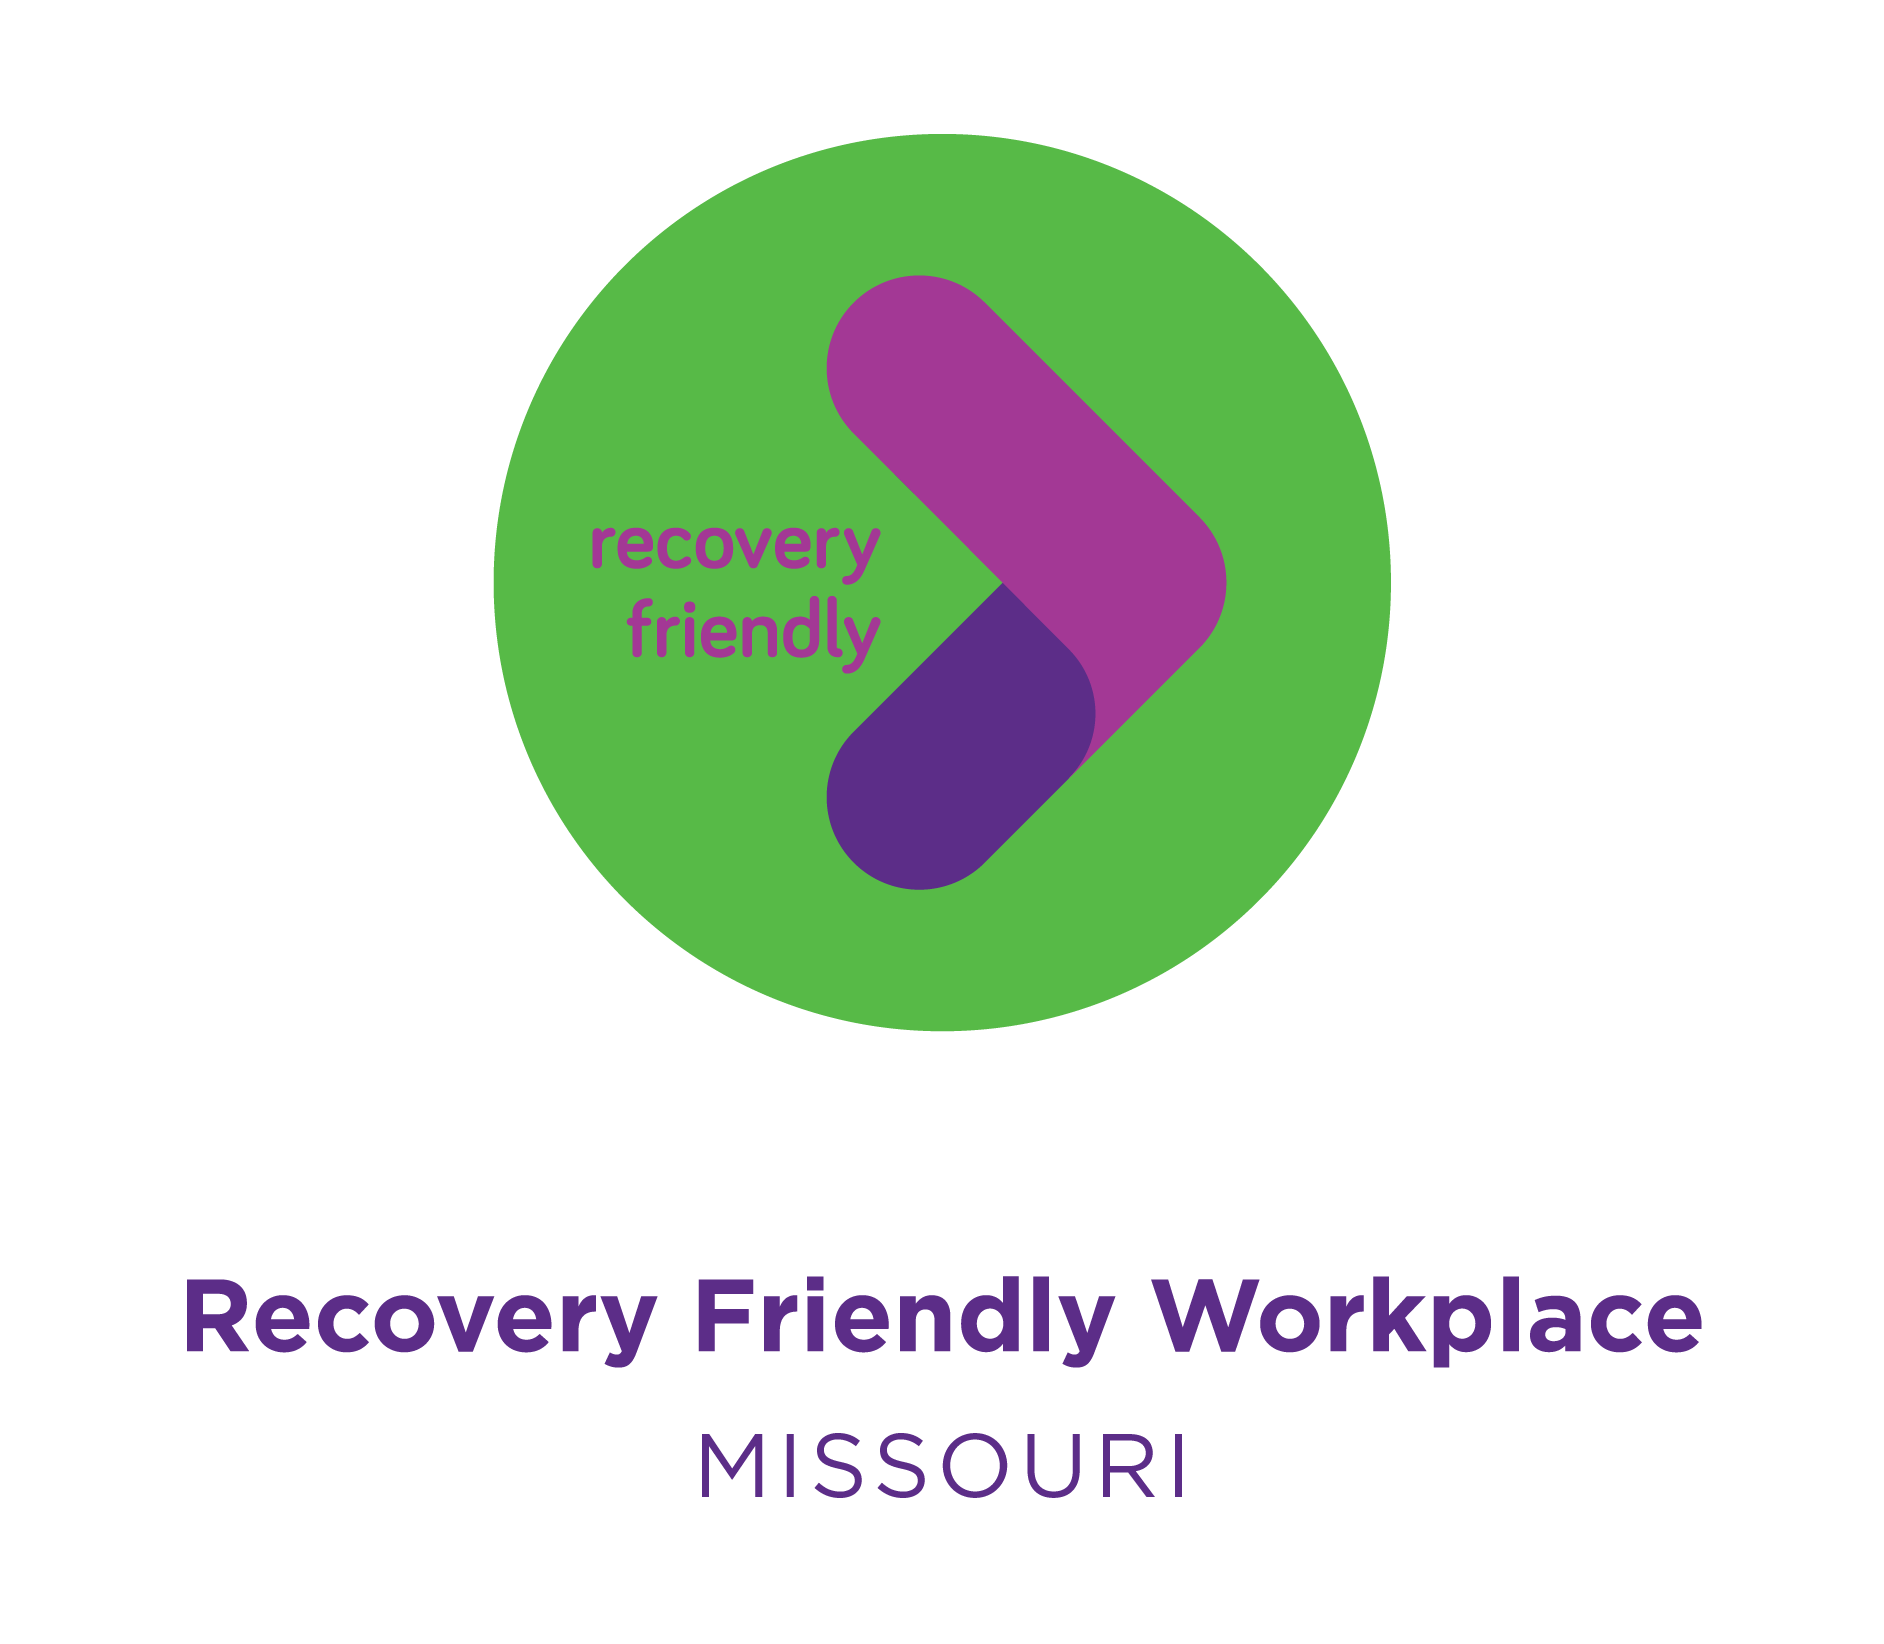 Community conversations to engage employers in building Recovery Friendly Workplace networks